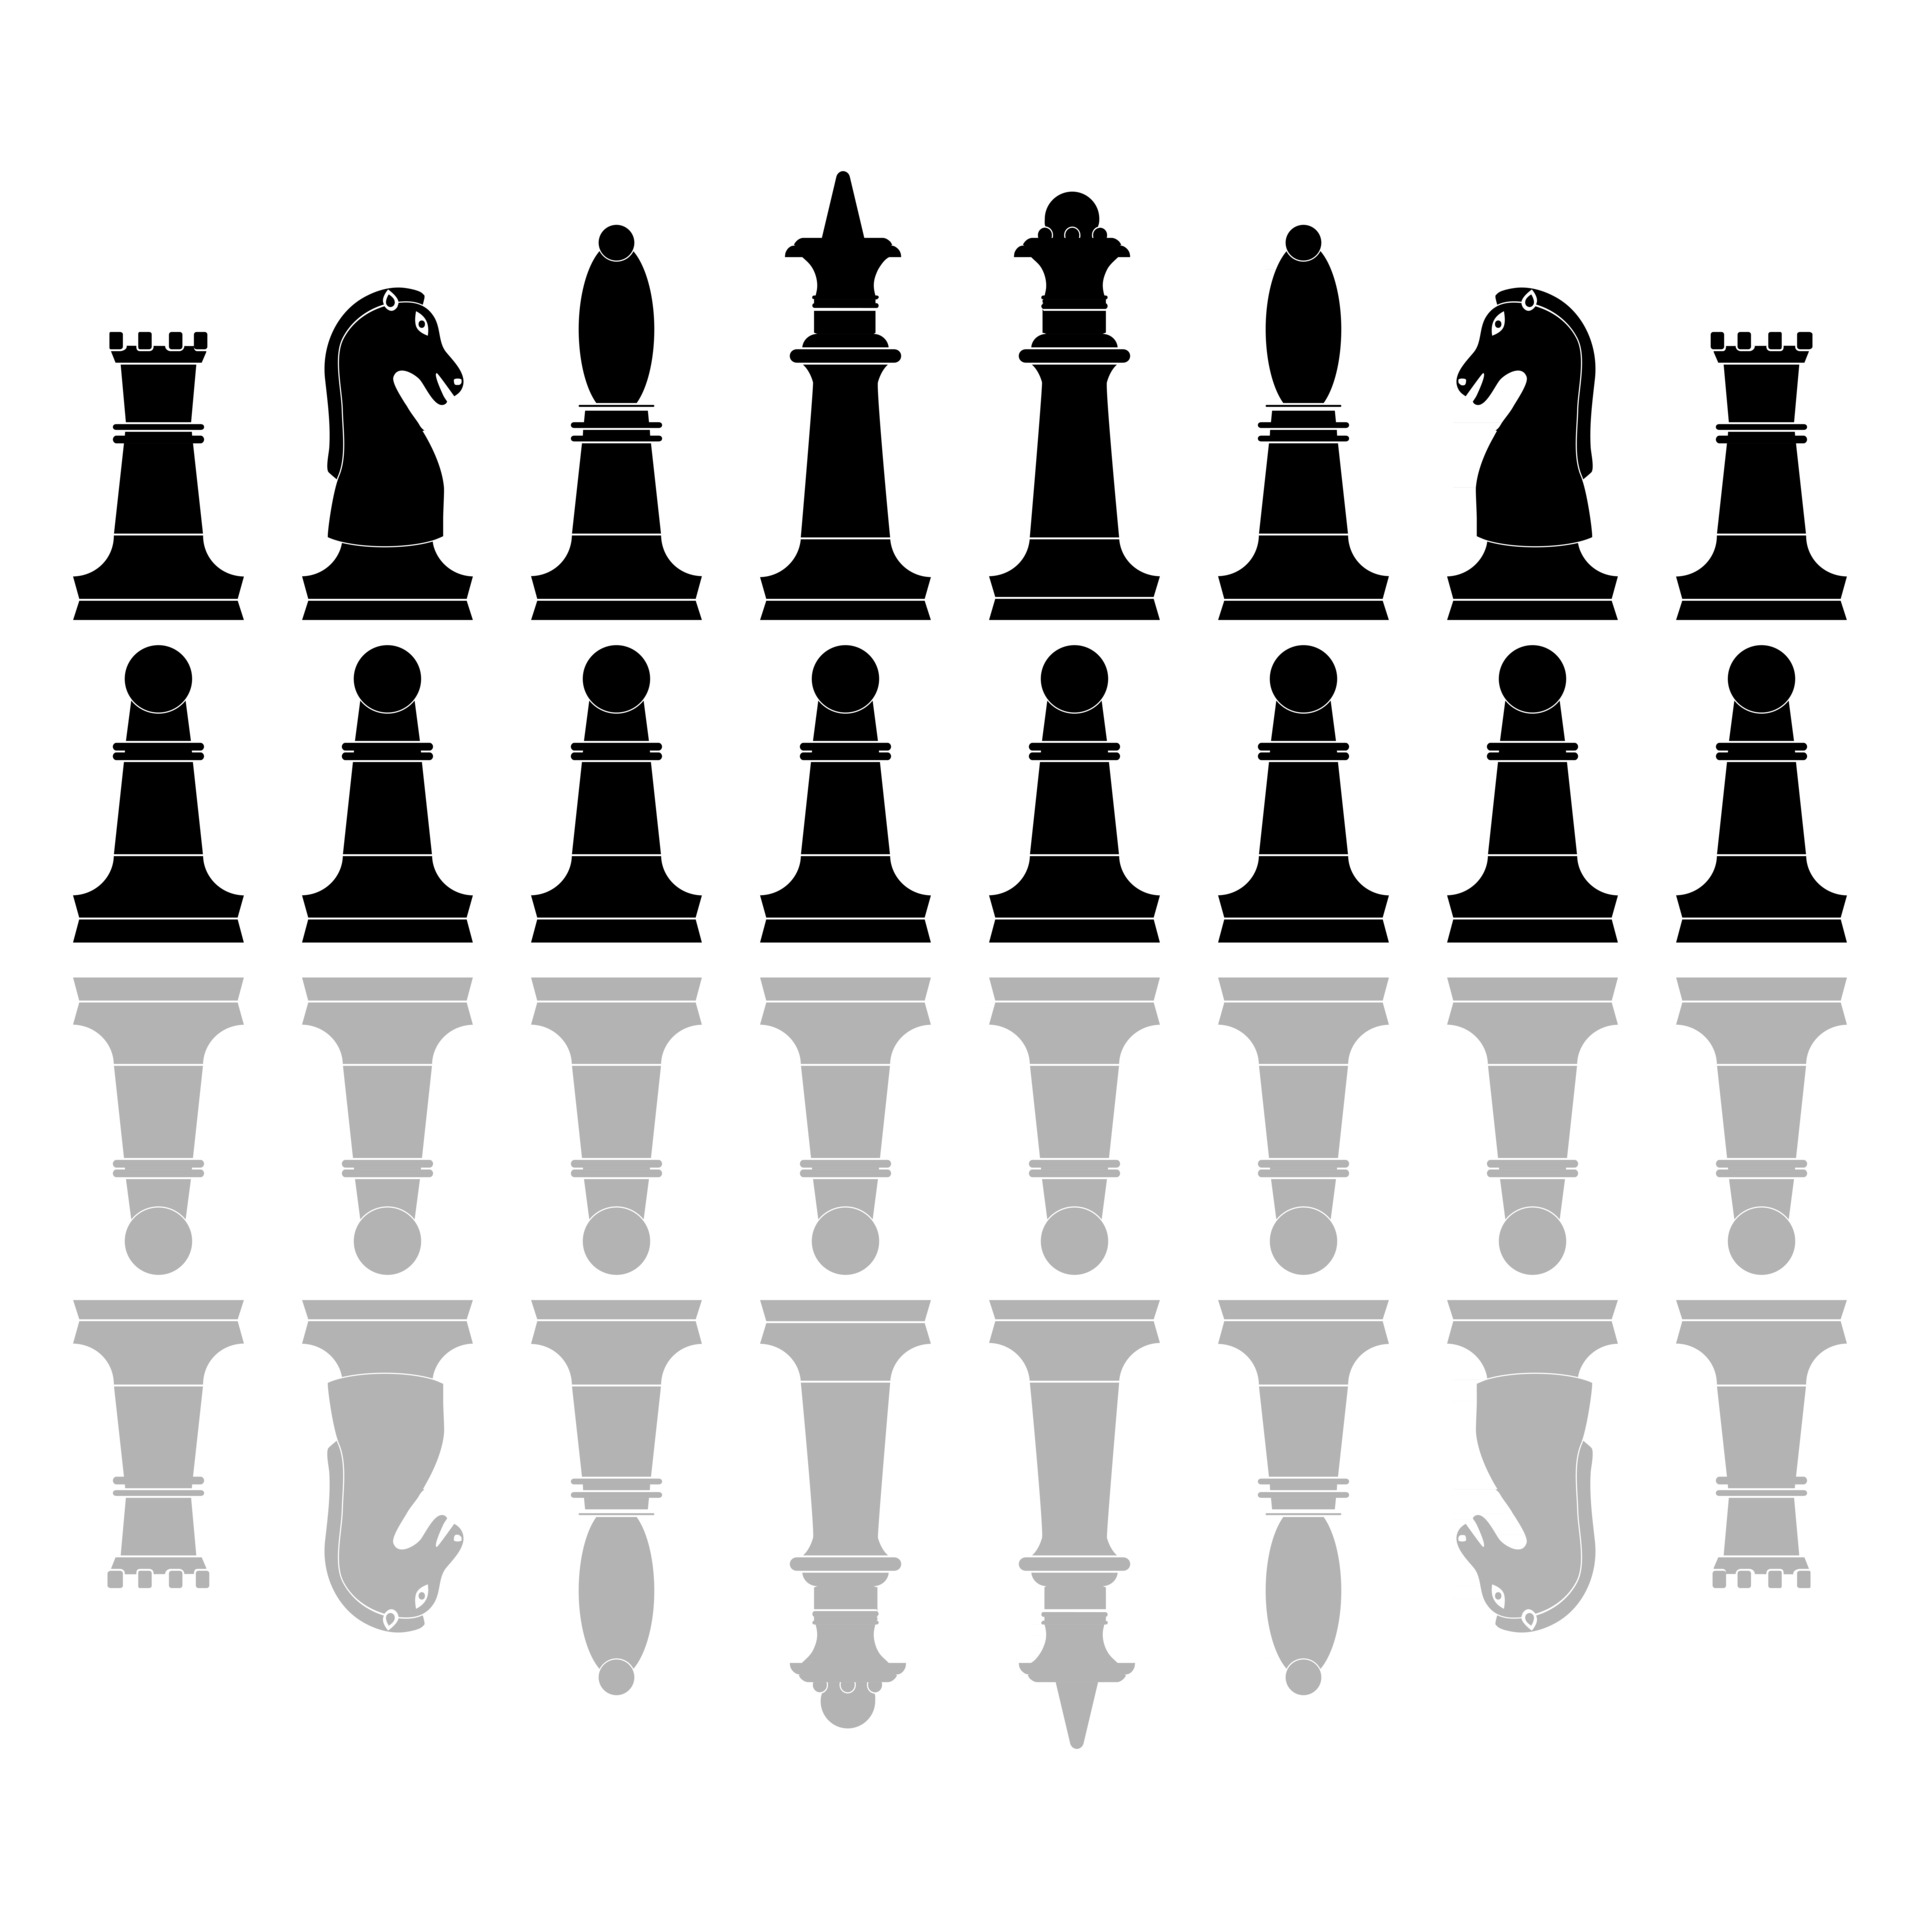 Chess and board icons set, chessmen banner, silhouette, flat black and  white drawing. Piece pawn, king, queen, bishop, knight, rook, with figure  names isolated on white background. Vector illustration - Stock Image 